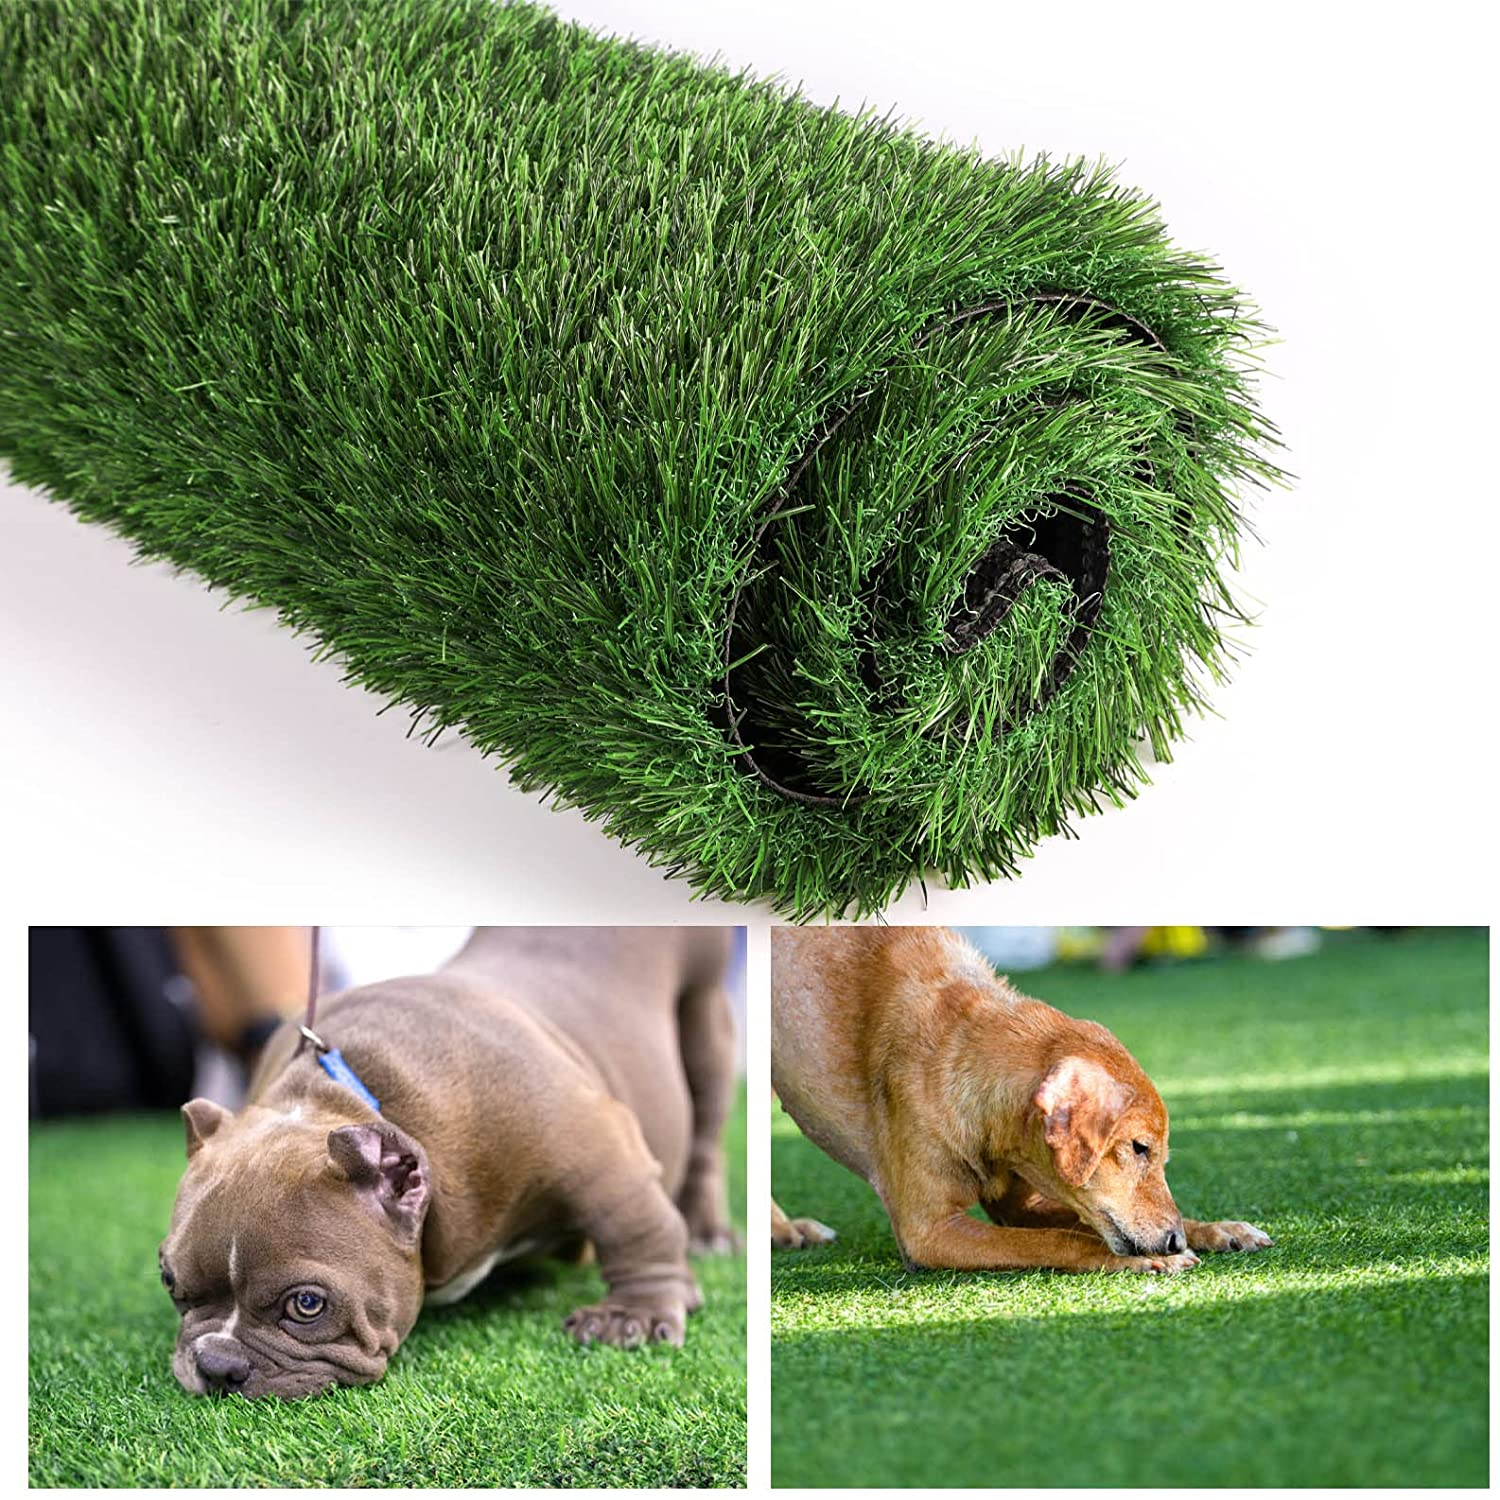 GRASSCLUB Artificial Grass Manufacturer direct delivery Rug for Dogs 40 in X unisex 1. 28 Turf